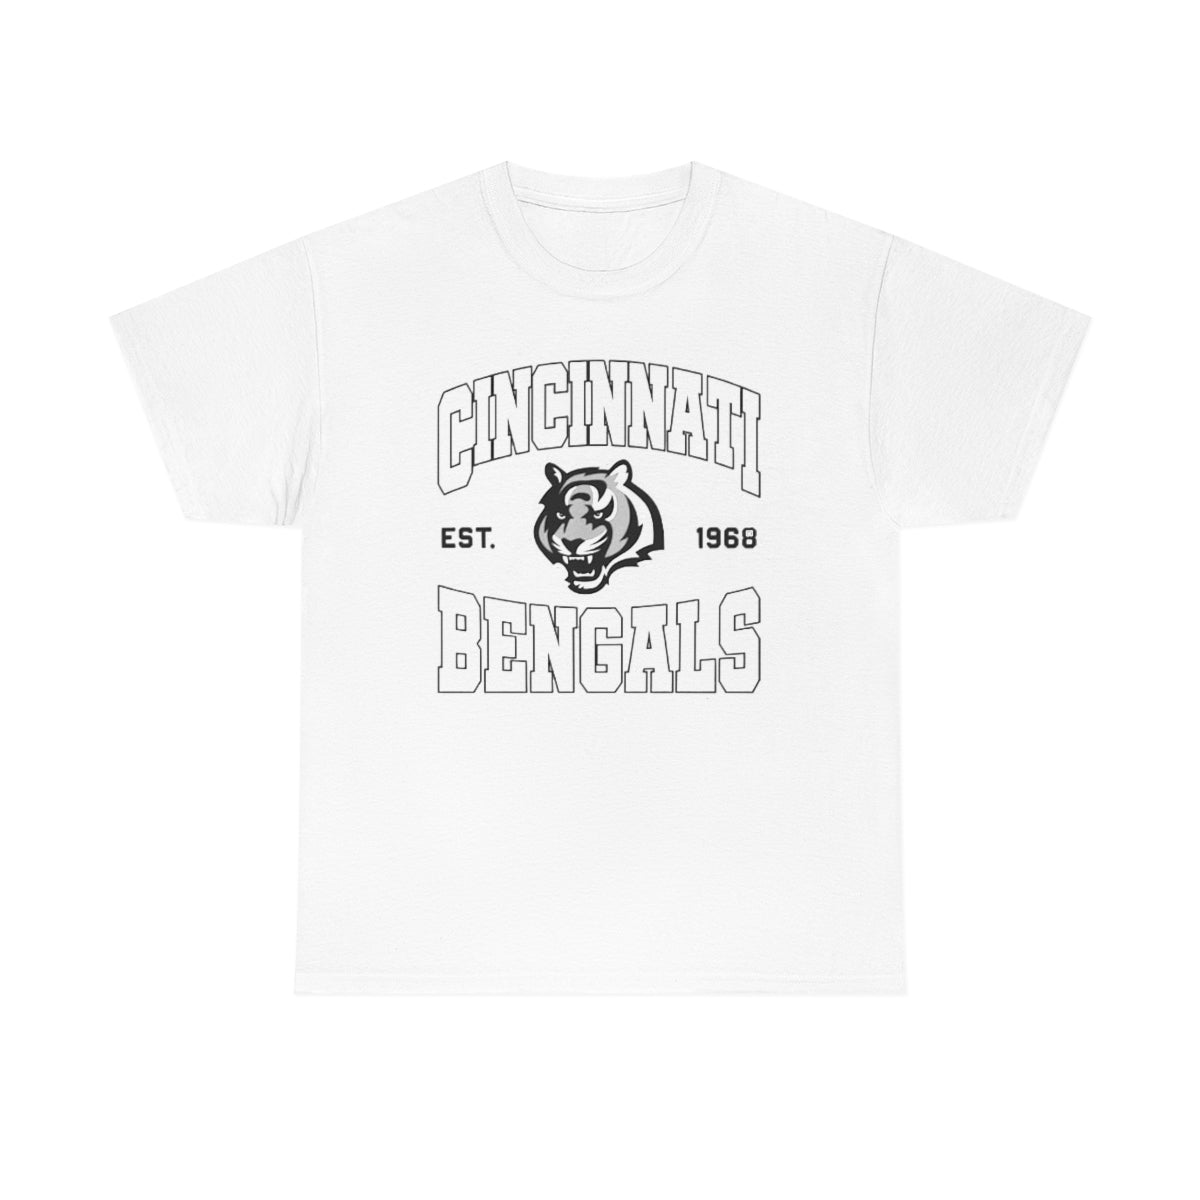 PACE: "BNGLS WHITE TIGER"/ Unisex Heavy Cotton T-Shirt